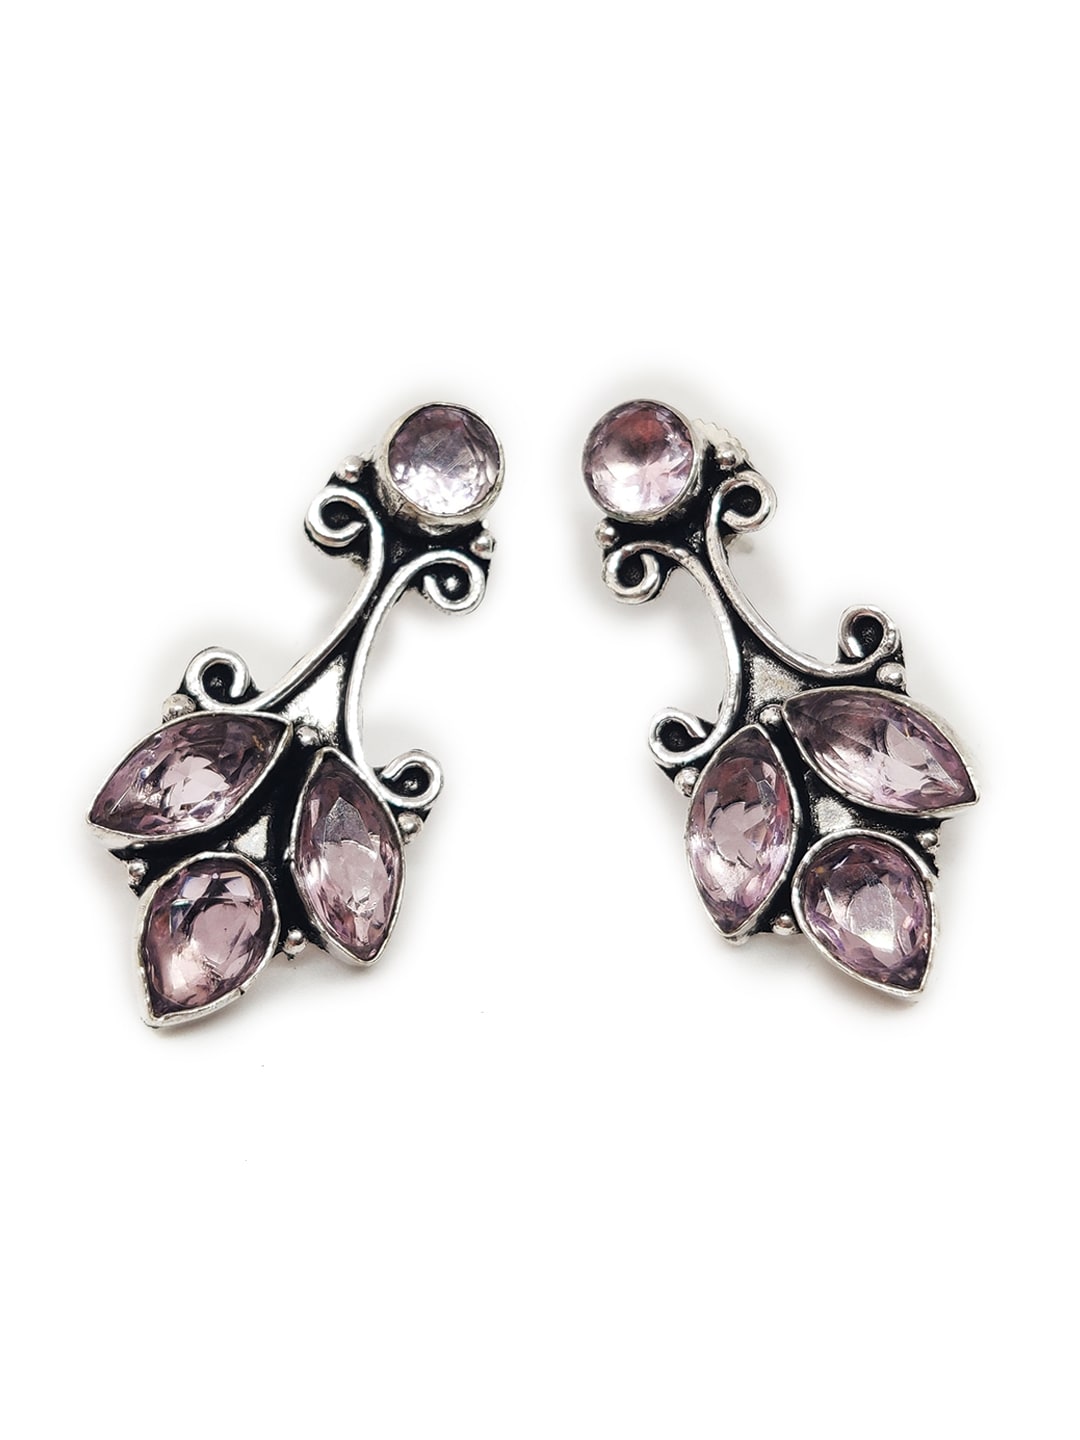 EL REGALO Pink Floral Studs Earrings - for Women and Girls
Style ID: 16851568